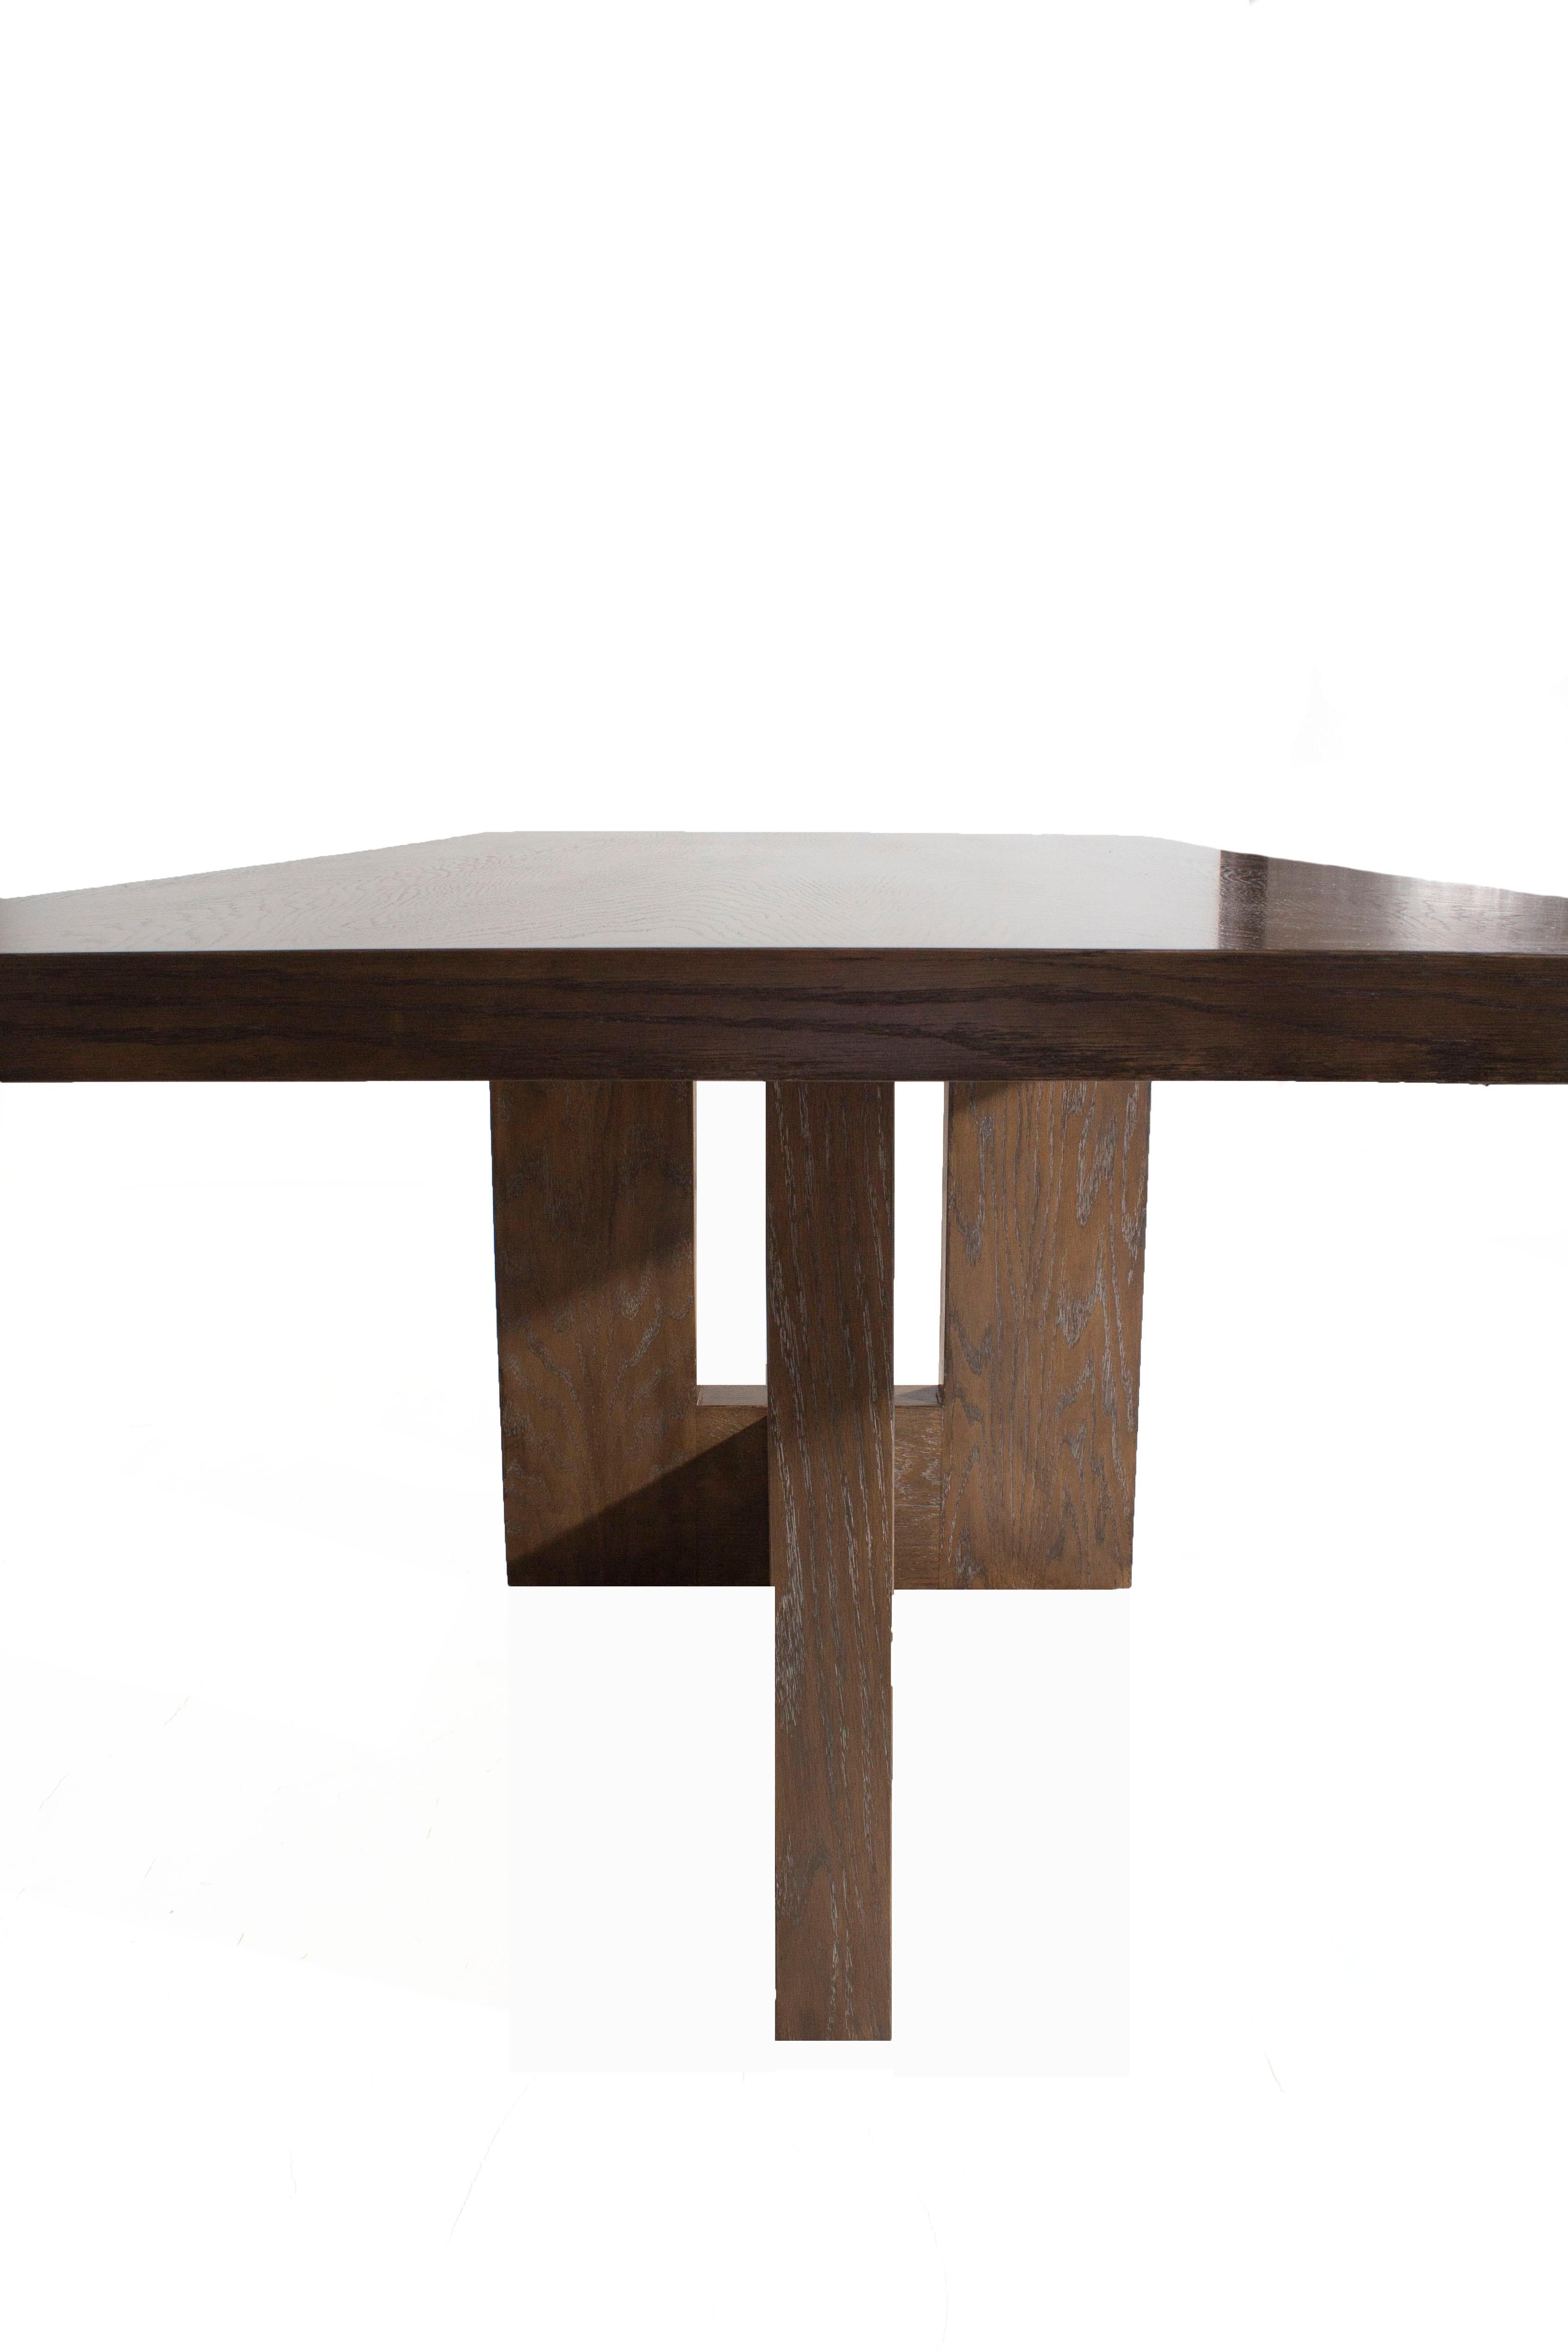 red oak kitchen table